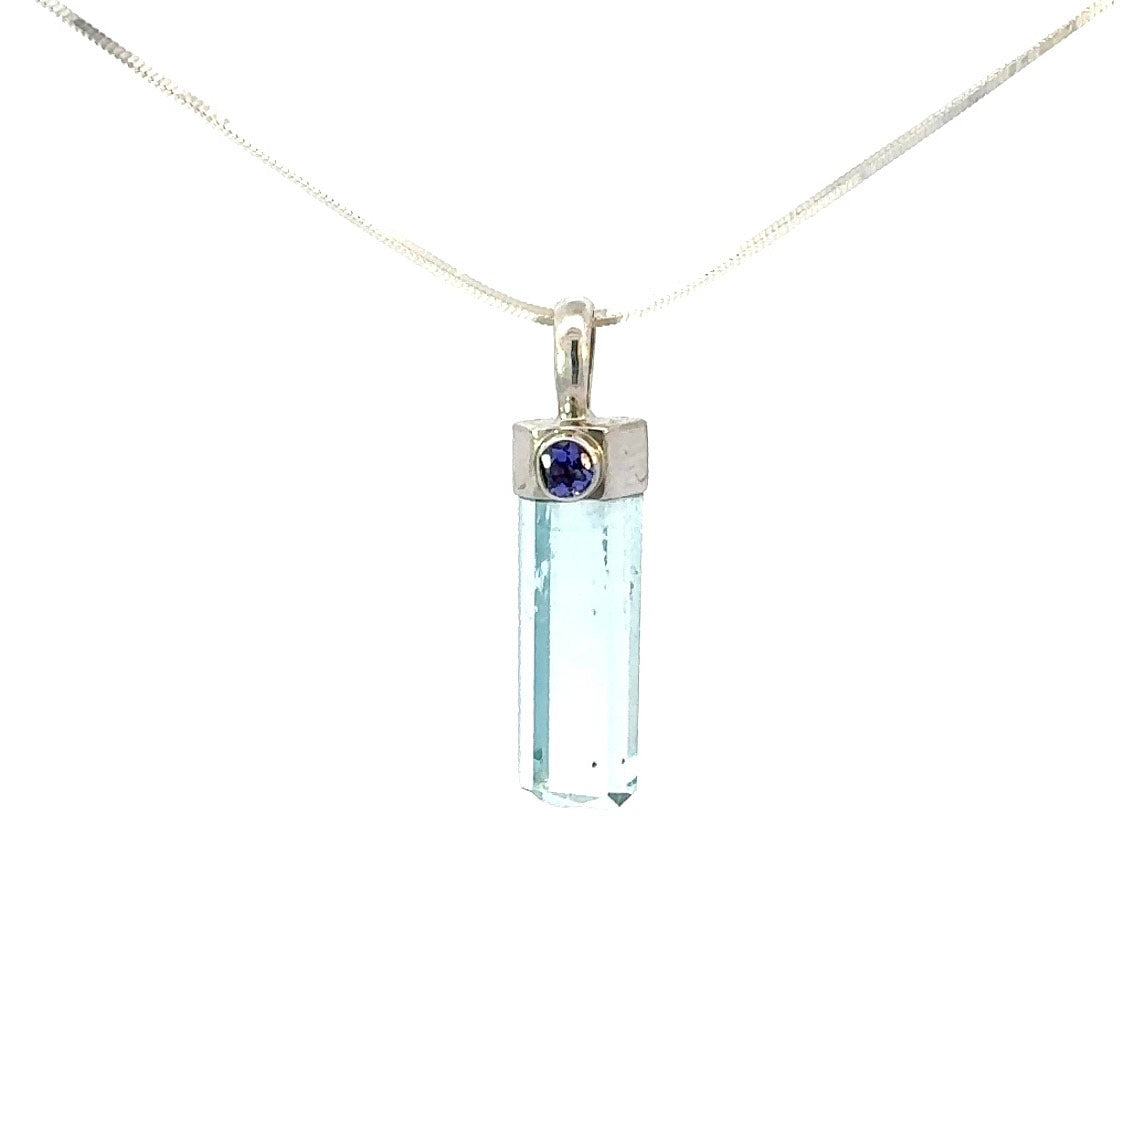 Aquamarine Pendant with Sapphire in Sterling Silver